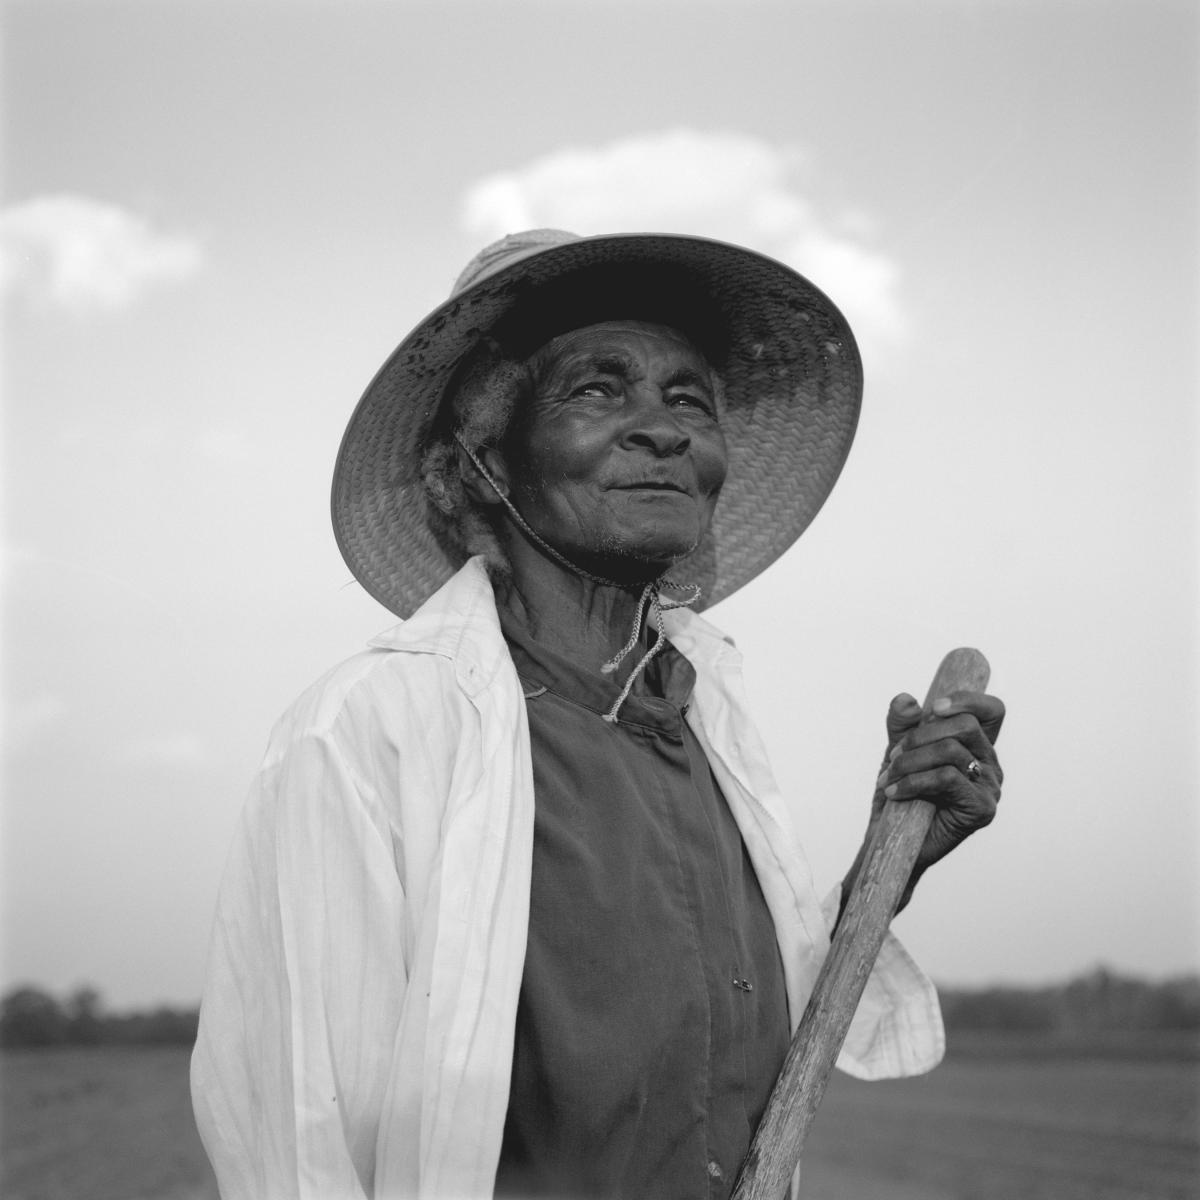 <p><center>Brooks County, Georgia:</center></p>
Rosa Murphy, in her late eighties, continues to do light work in her fields. : Images : AMERICAN BLACK FARMERS PROJECT - John Ficara